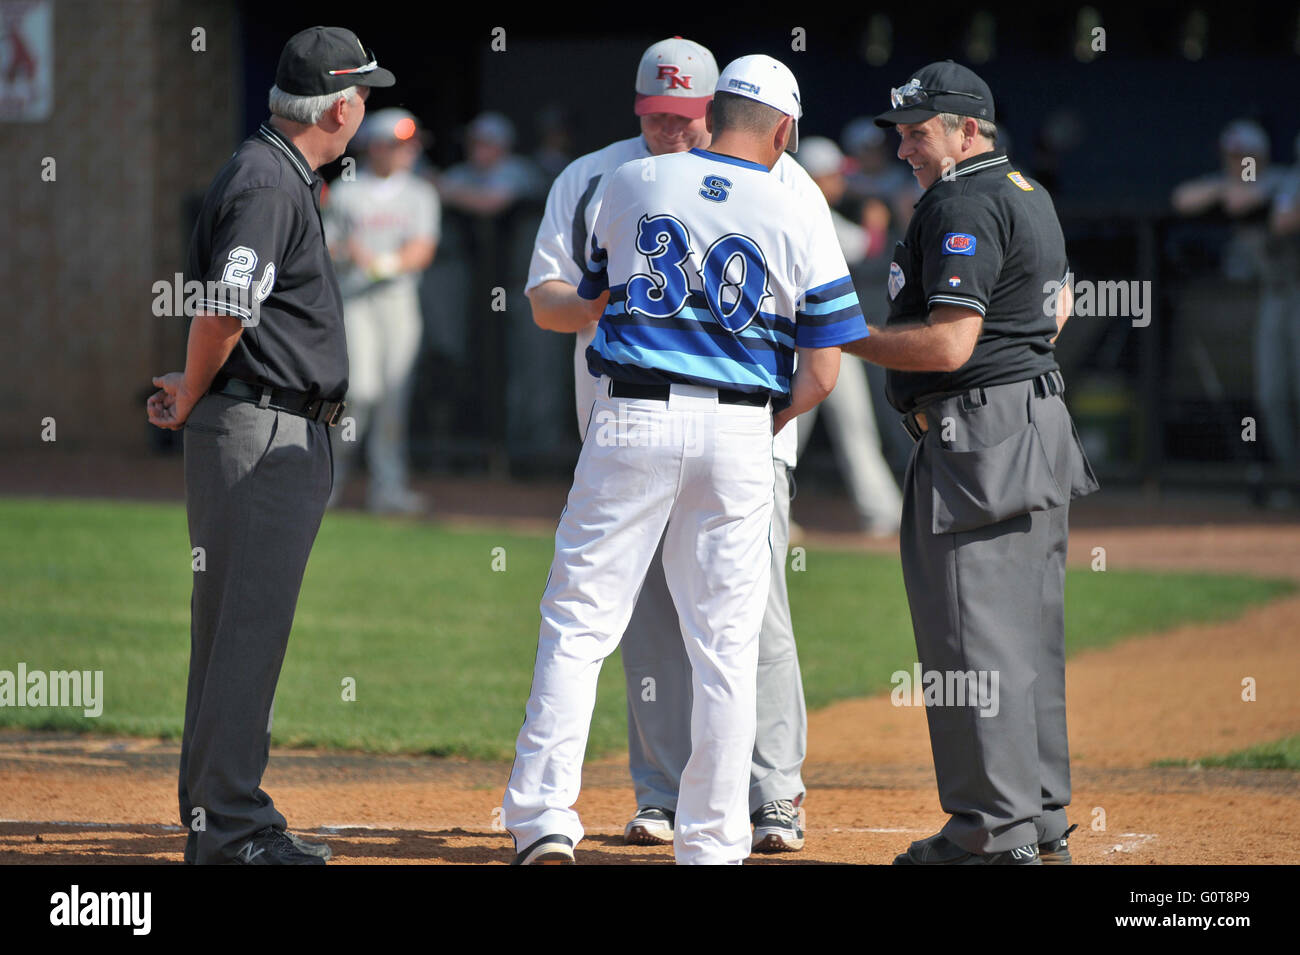 Umpires meet with head coaches to exchange lineup cards and go over ground rules prior to a high school baseball game. USA. Stock Photo